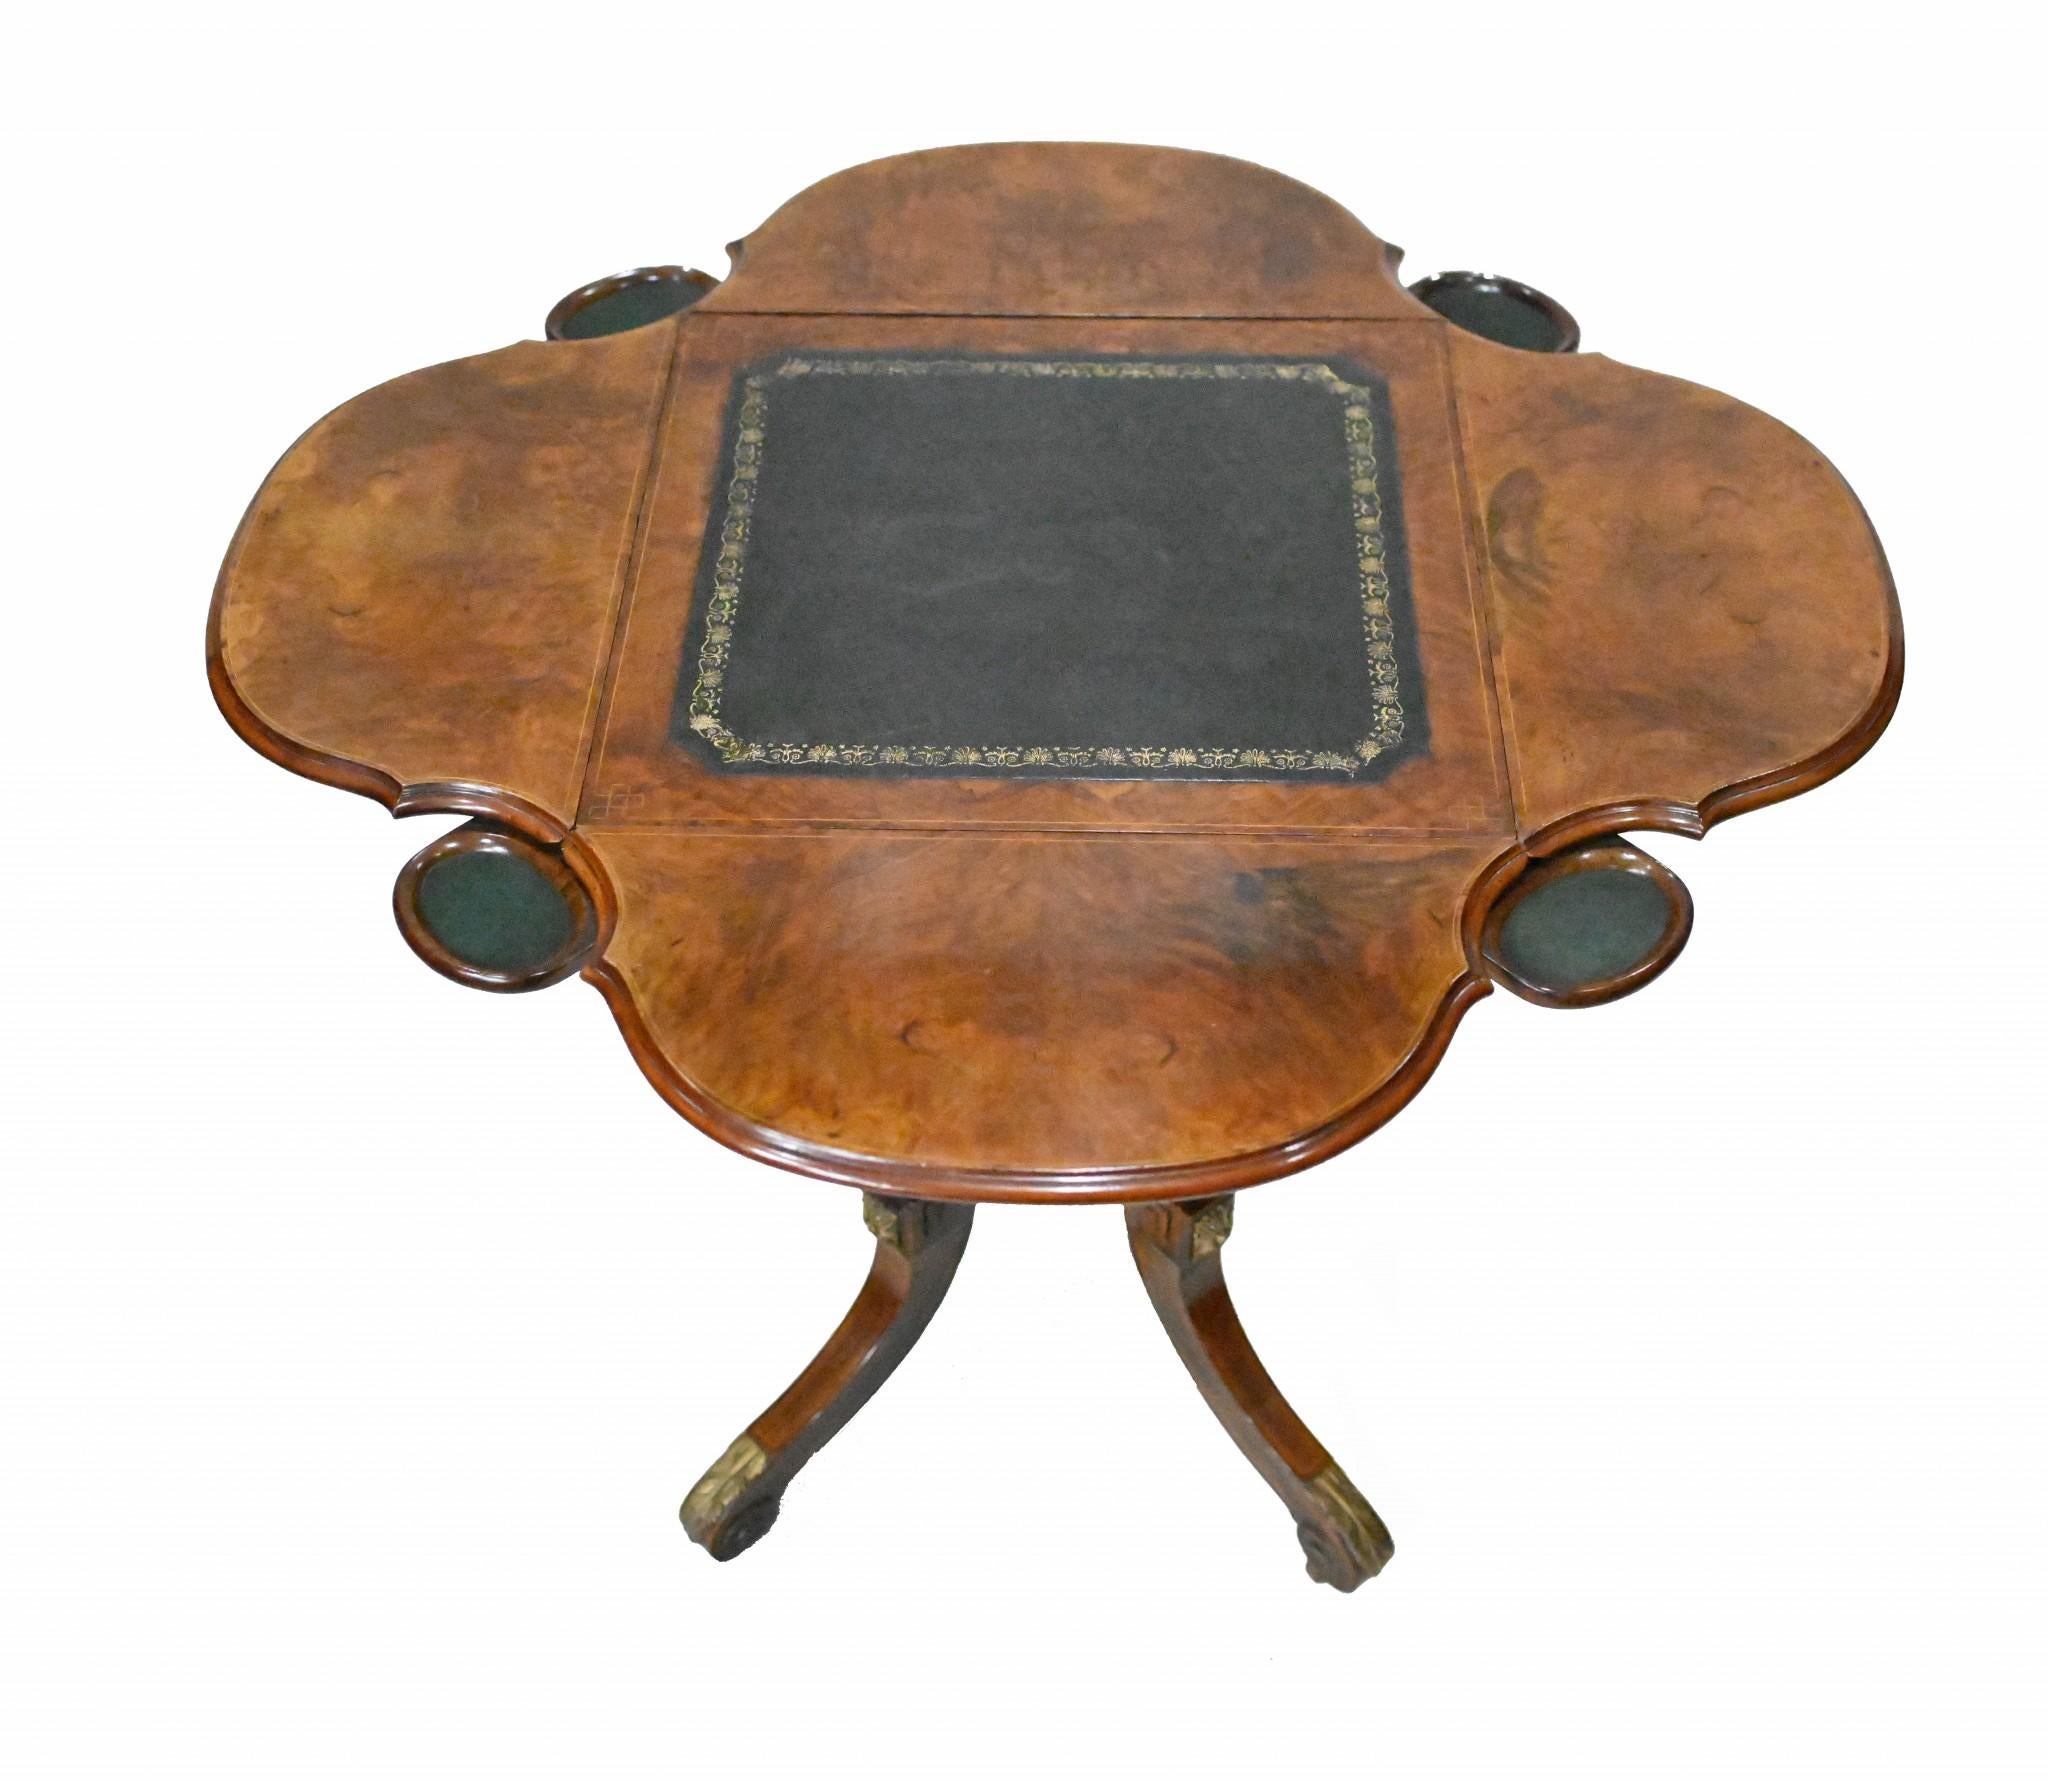 You are viewing a gorgeous Victorian bridge or games table
Hand crafted from walnut we date this piece of antique furniture to 1860
Features an unusual clover shape when fully open alongside four round trays for chips, pieces and money
Features gilt